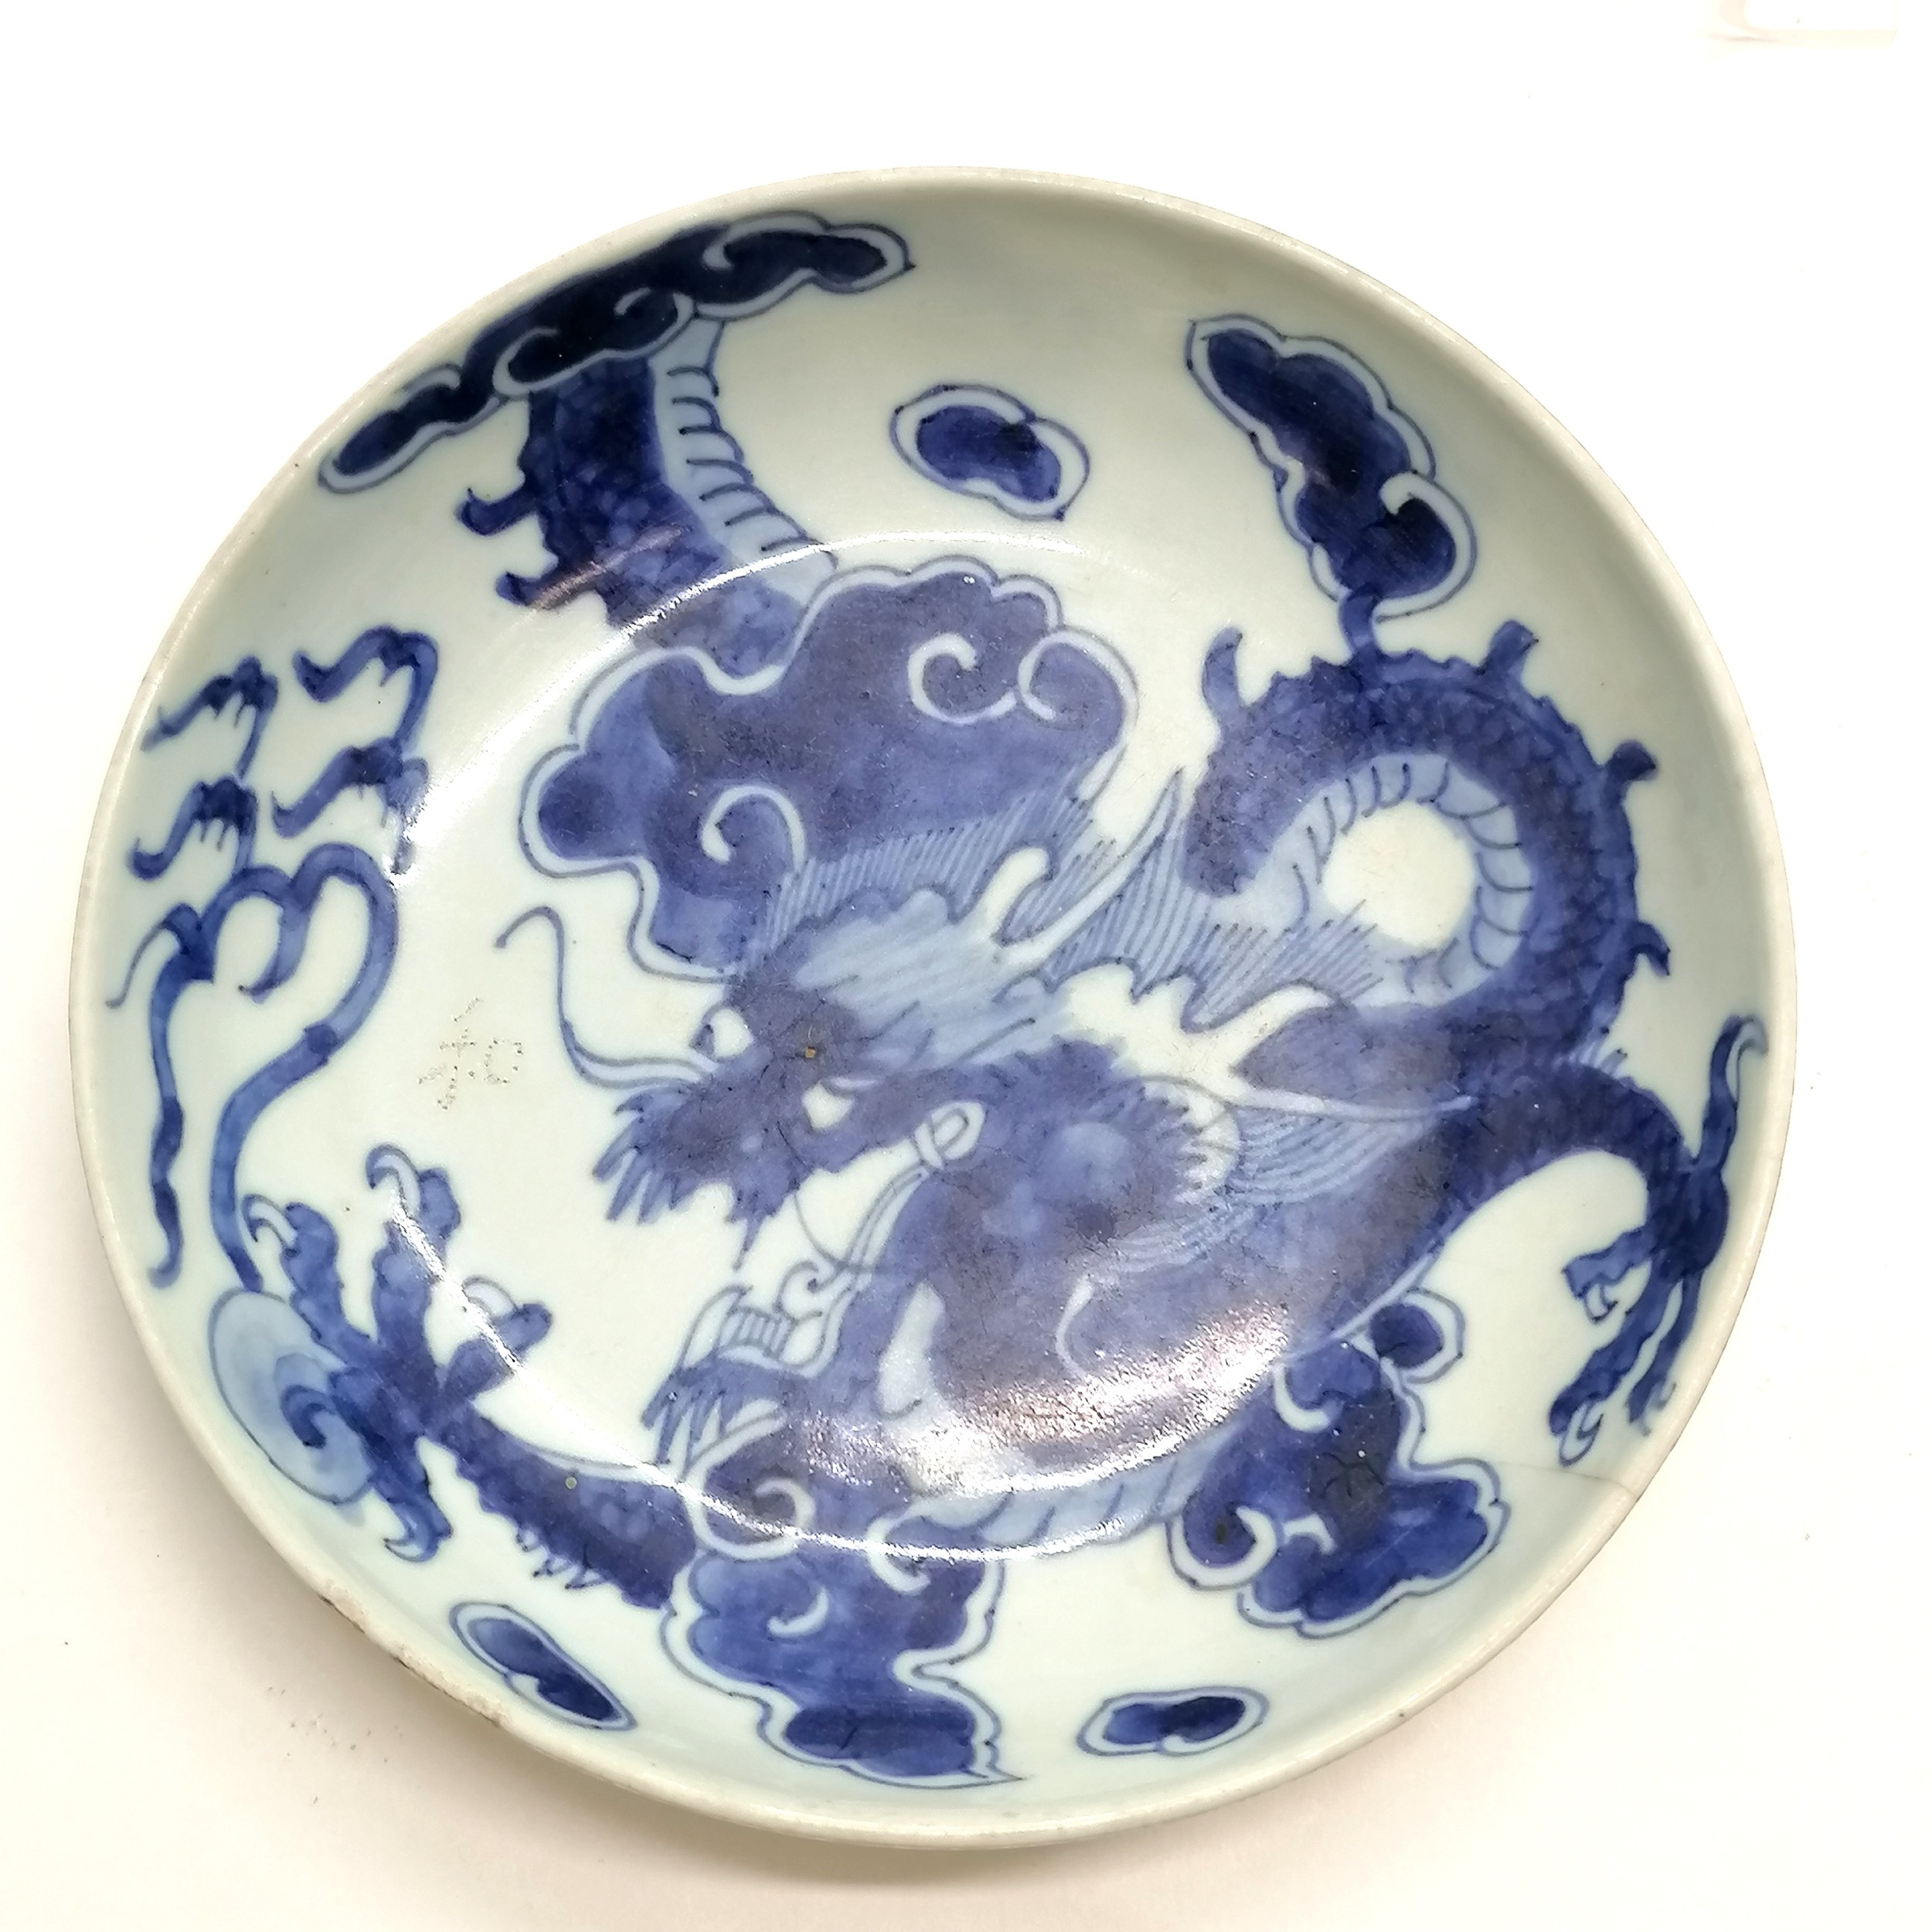 Antique Chinese dish with dragon detail & etched characters next to head - 16cm diameter & has